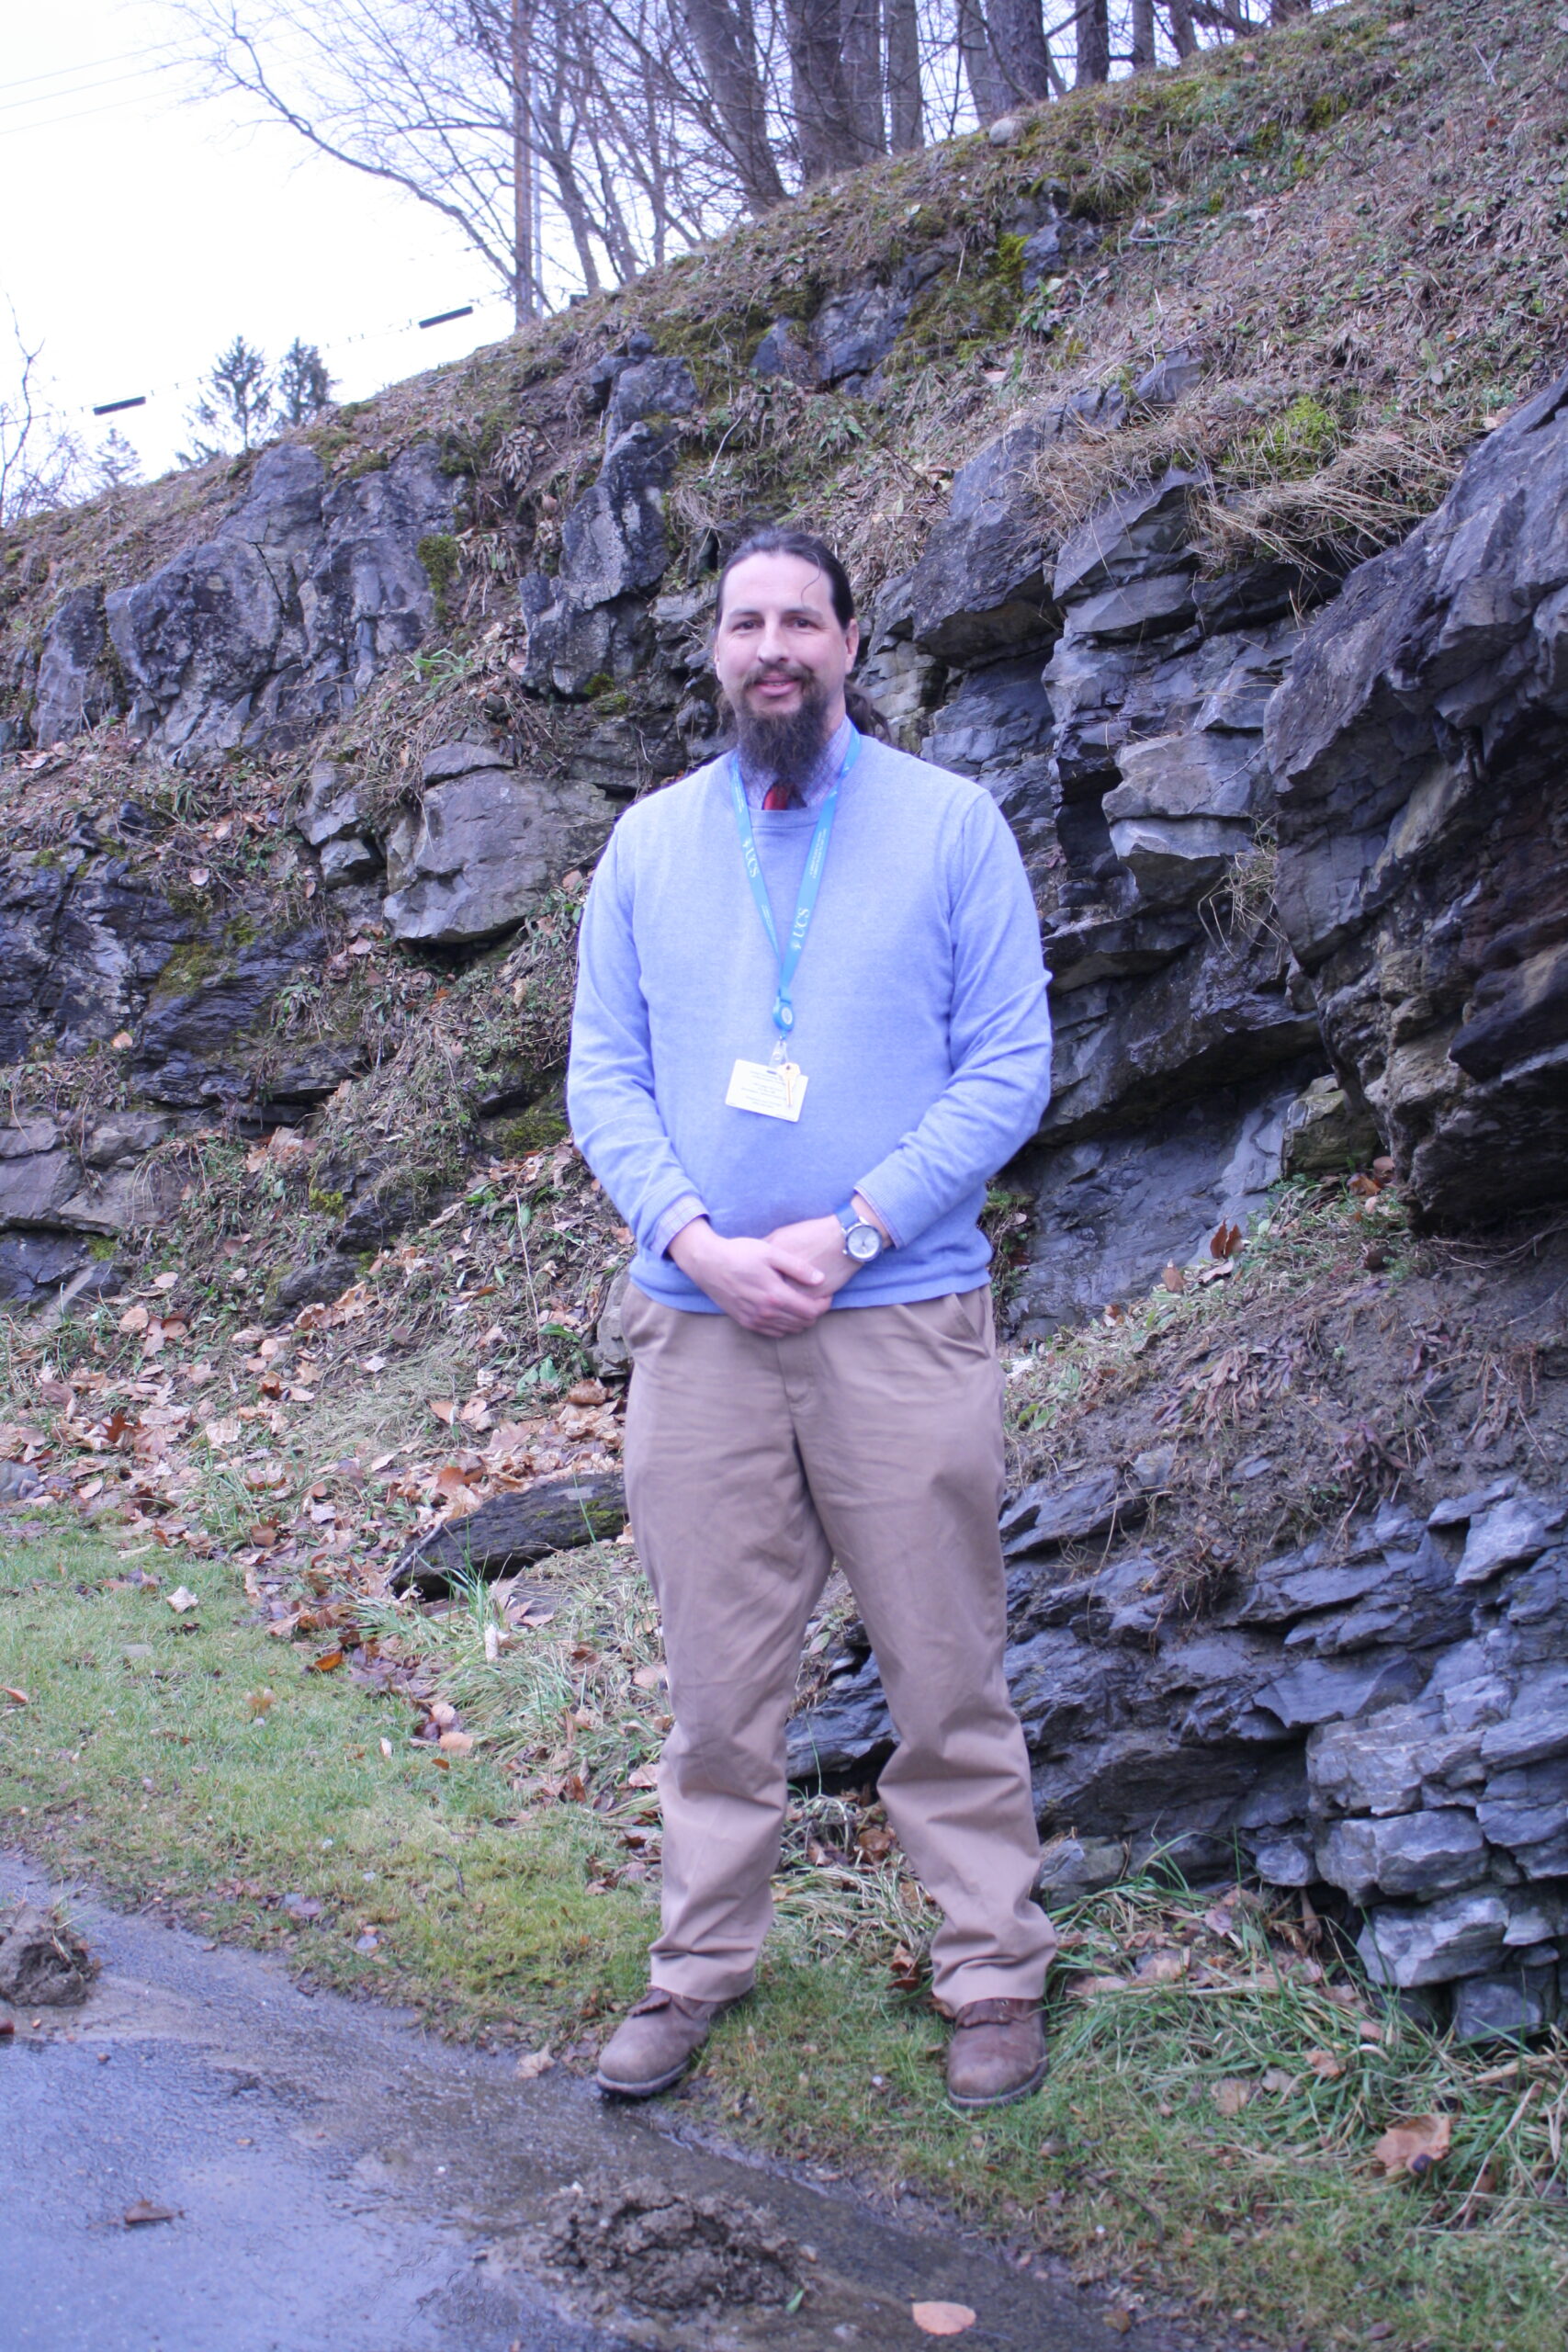 A man with long brown hair and a beard wearing a light blue sweater and tan pants stands in front of a rocky ledge.